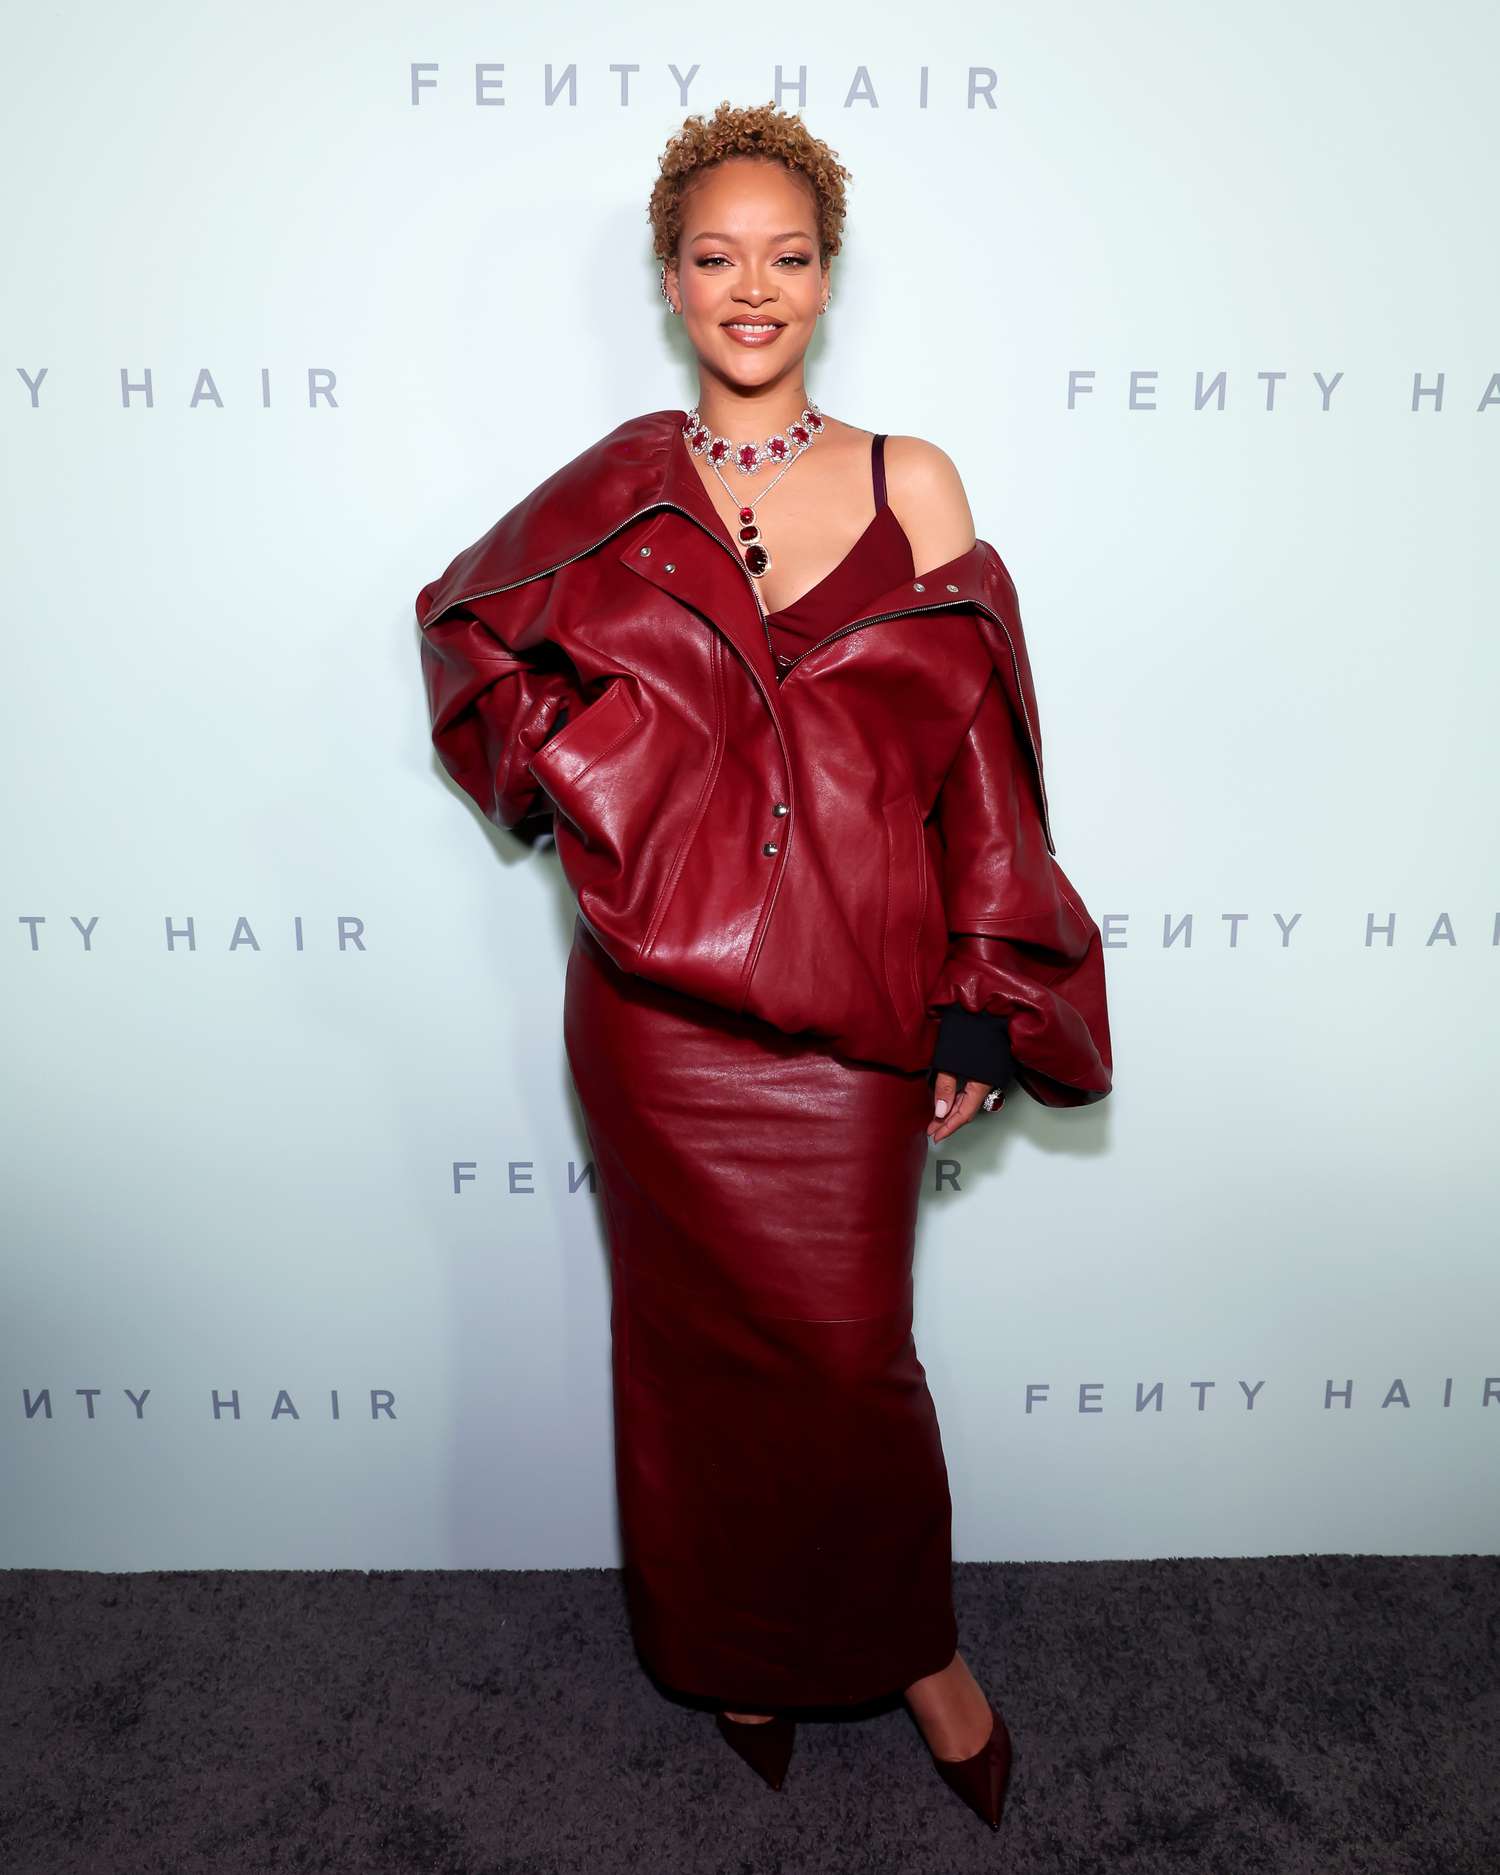 Rihanna wearing her natural curls and a red outfit in Los Angeles.